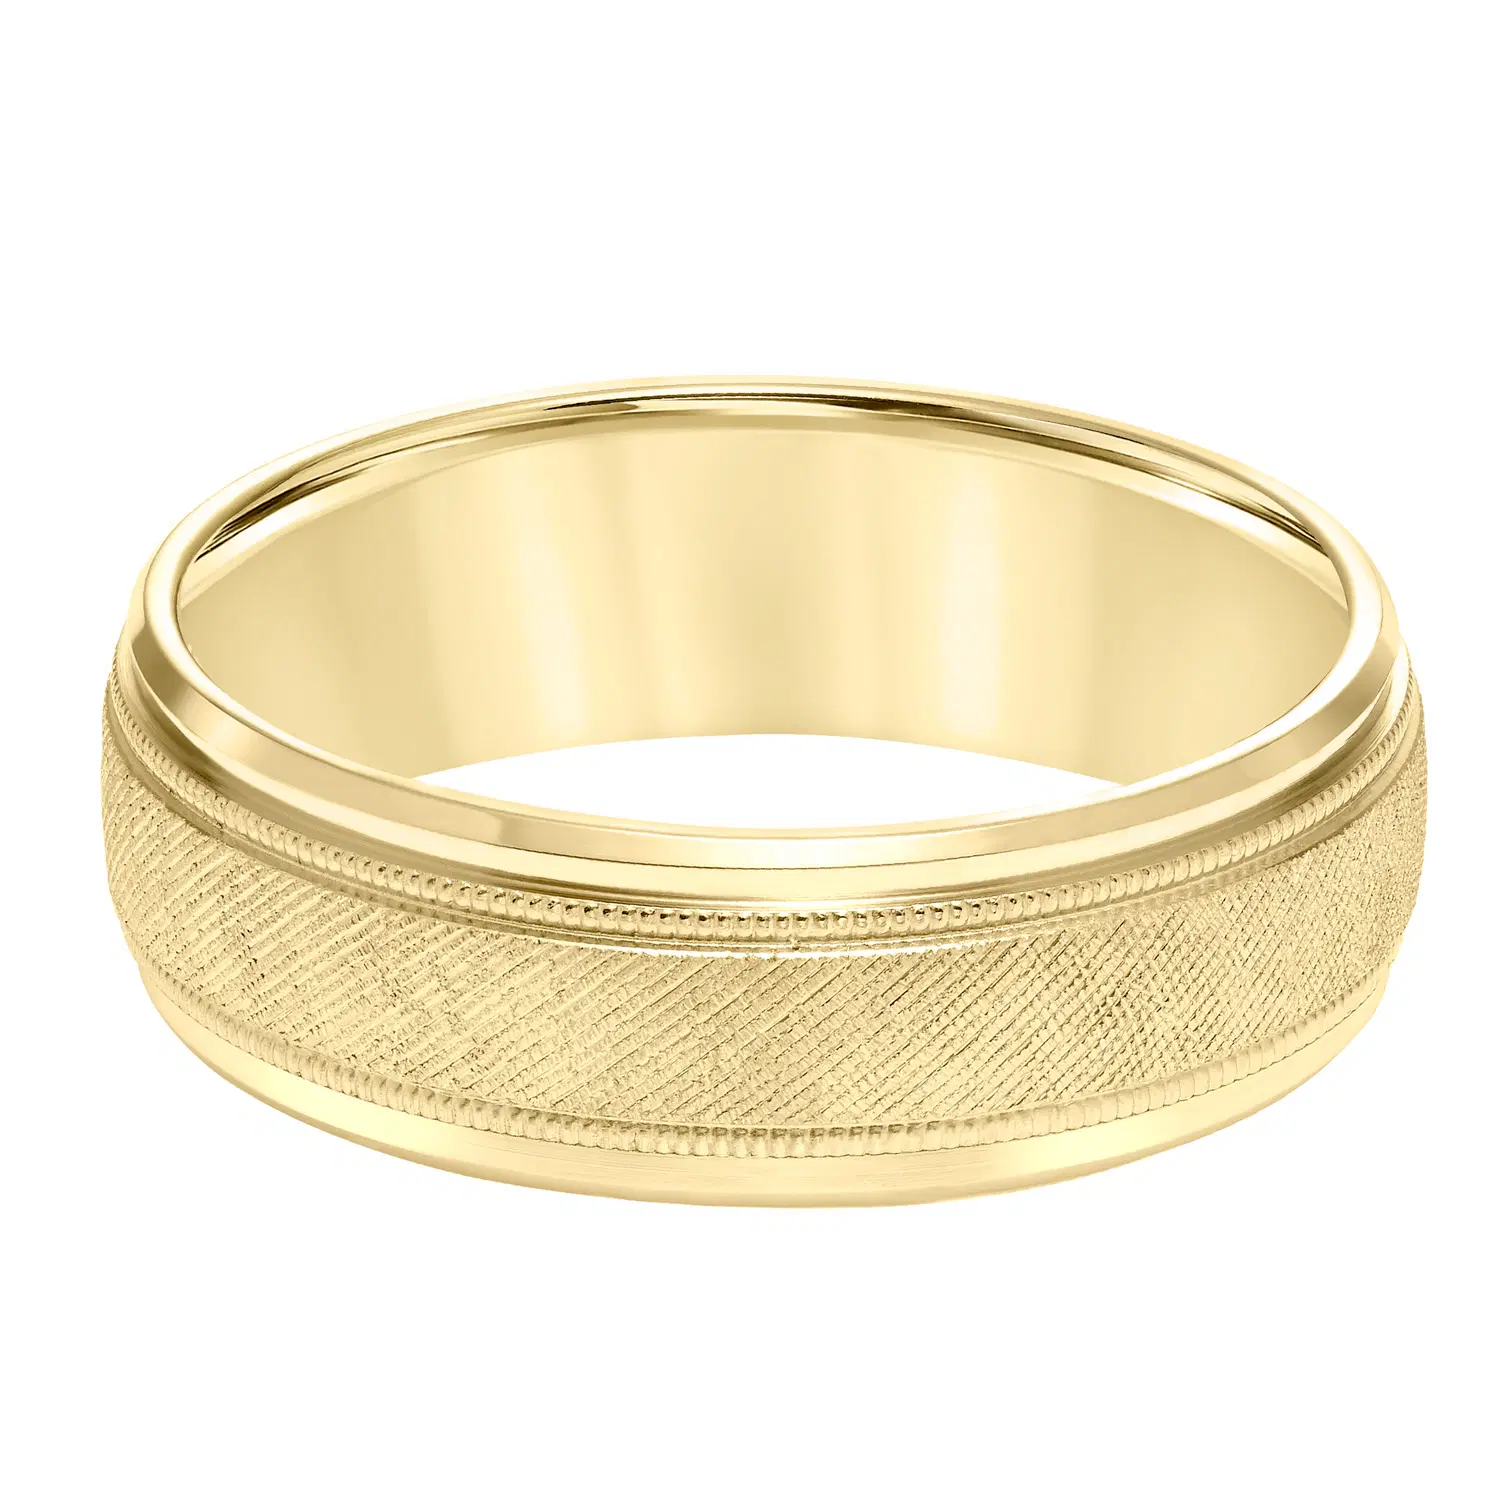 Gents 14k Yellow Gold 7mm Band with Florentine Finish